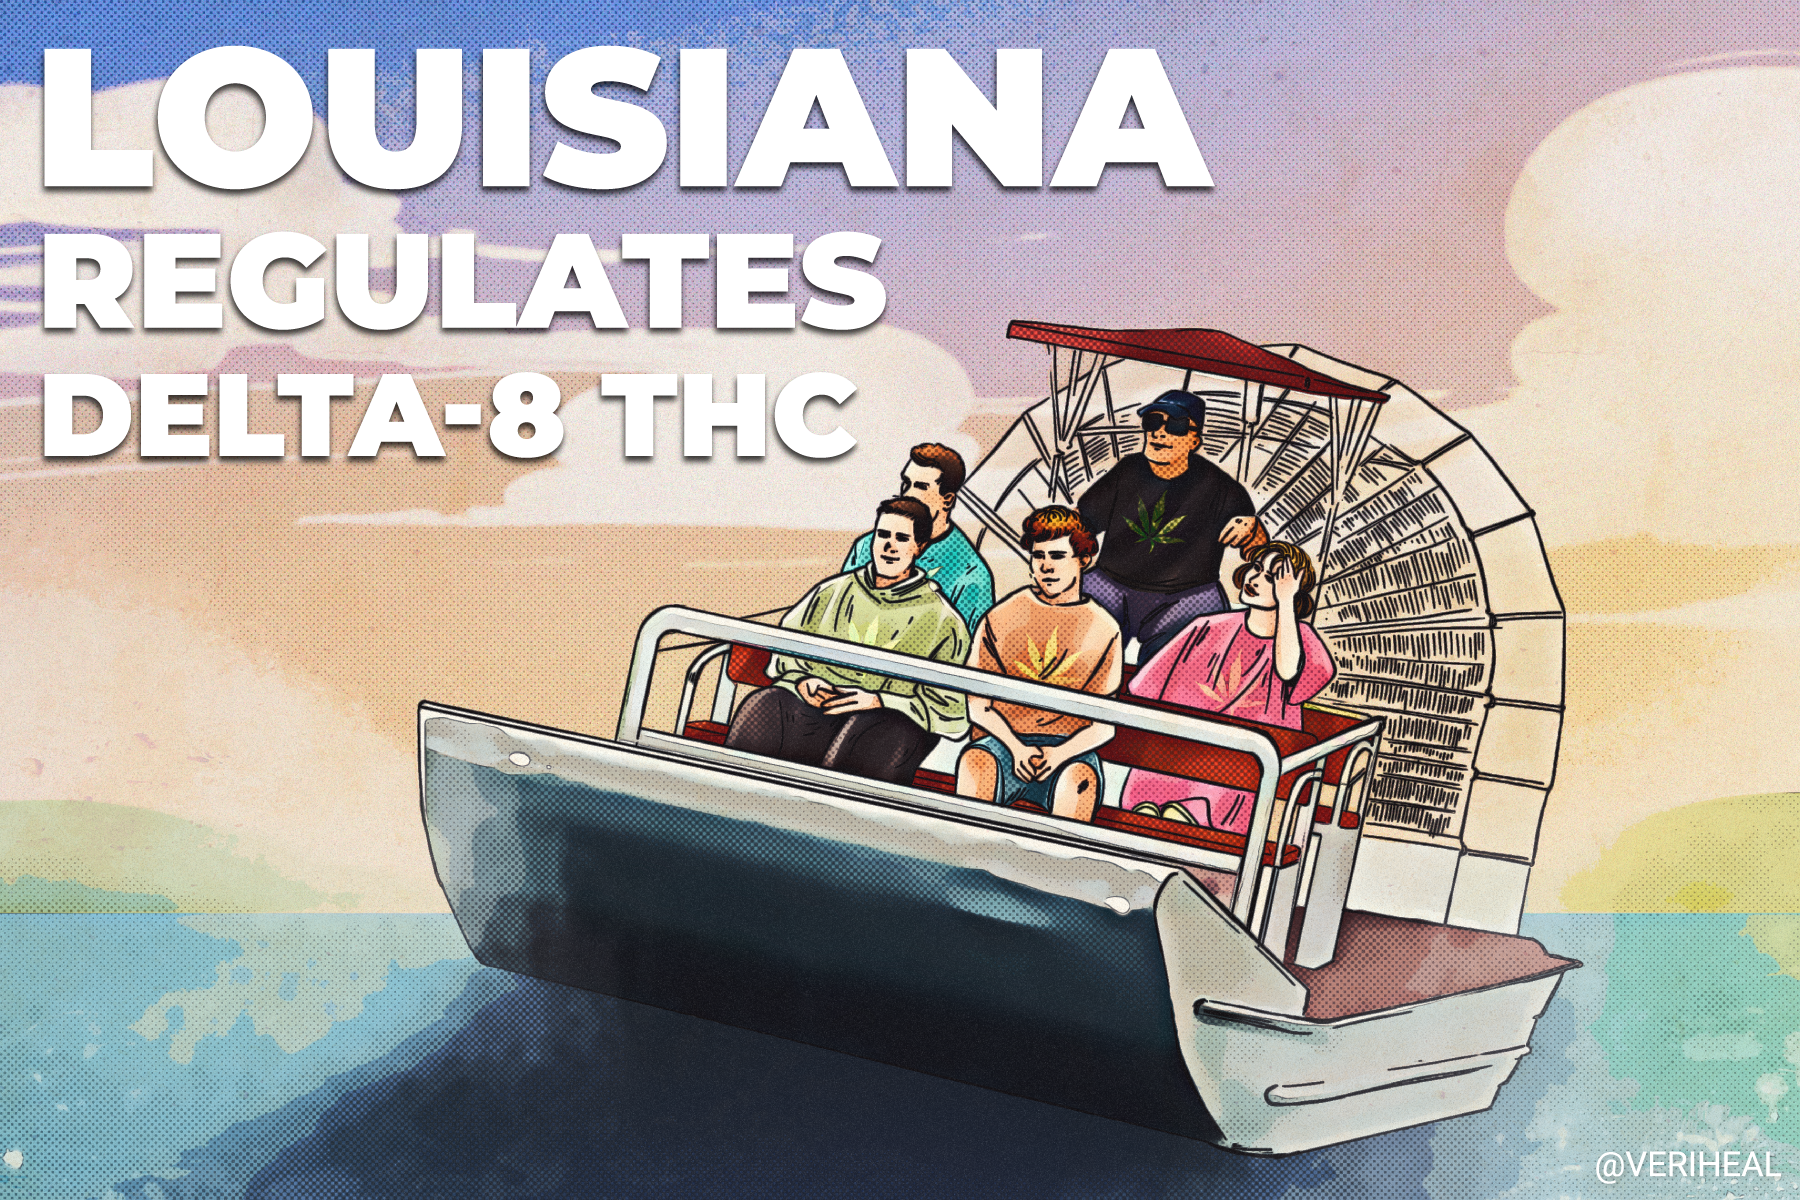 You Can Buy It in the Bayou: Louisiana Regulates Delta-8 THC